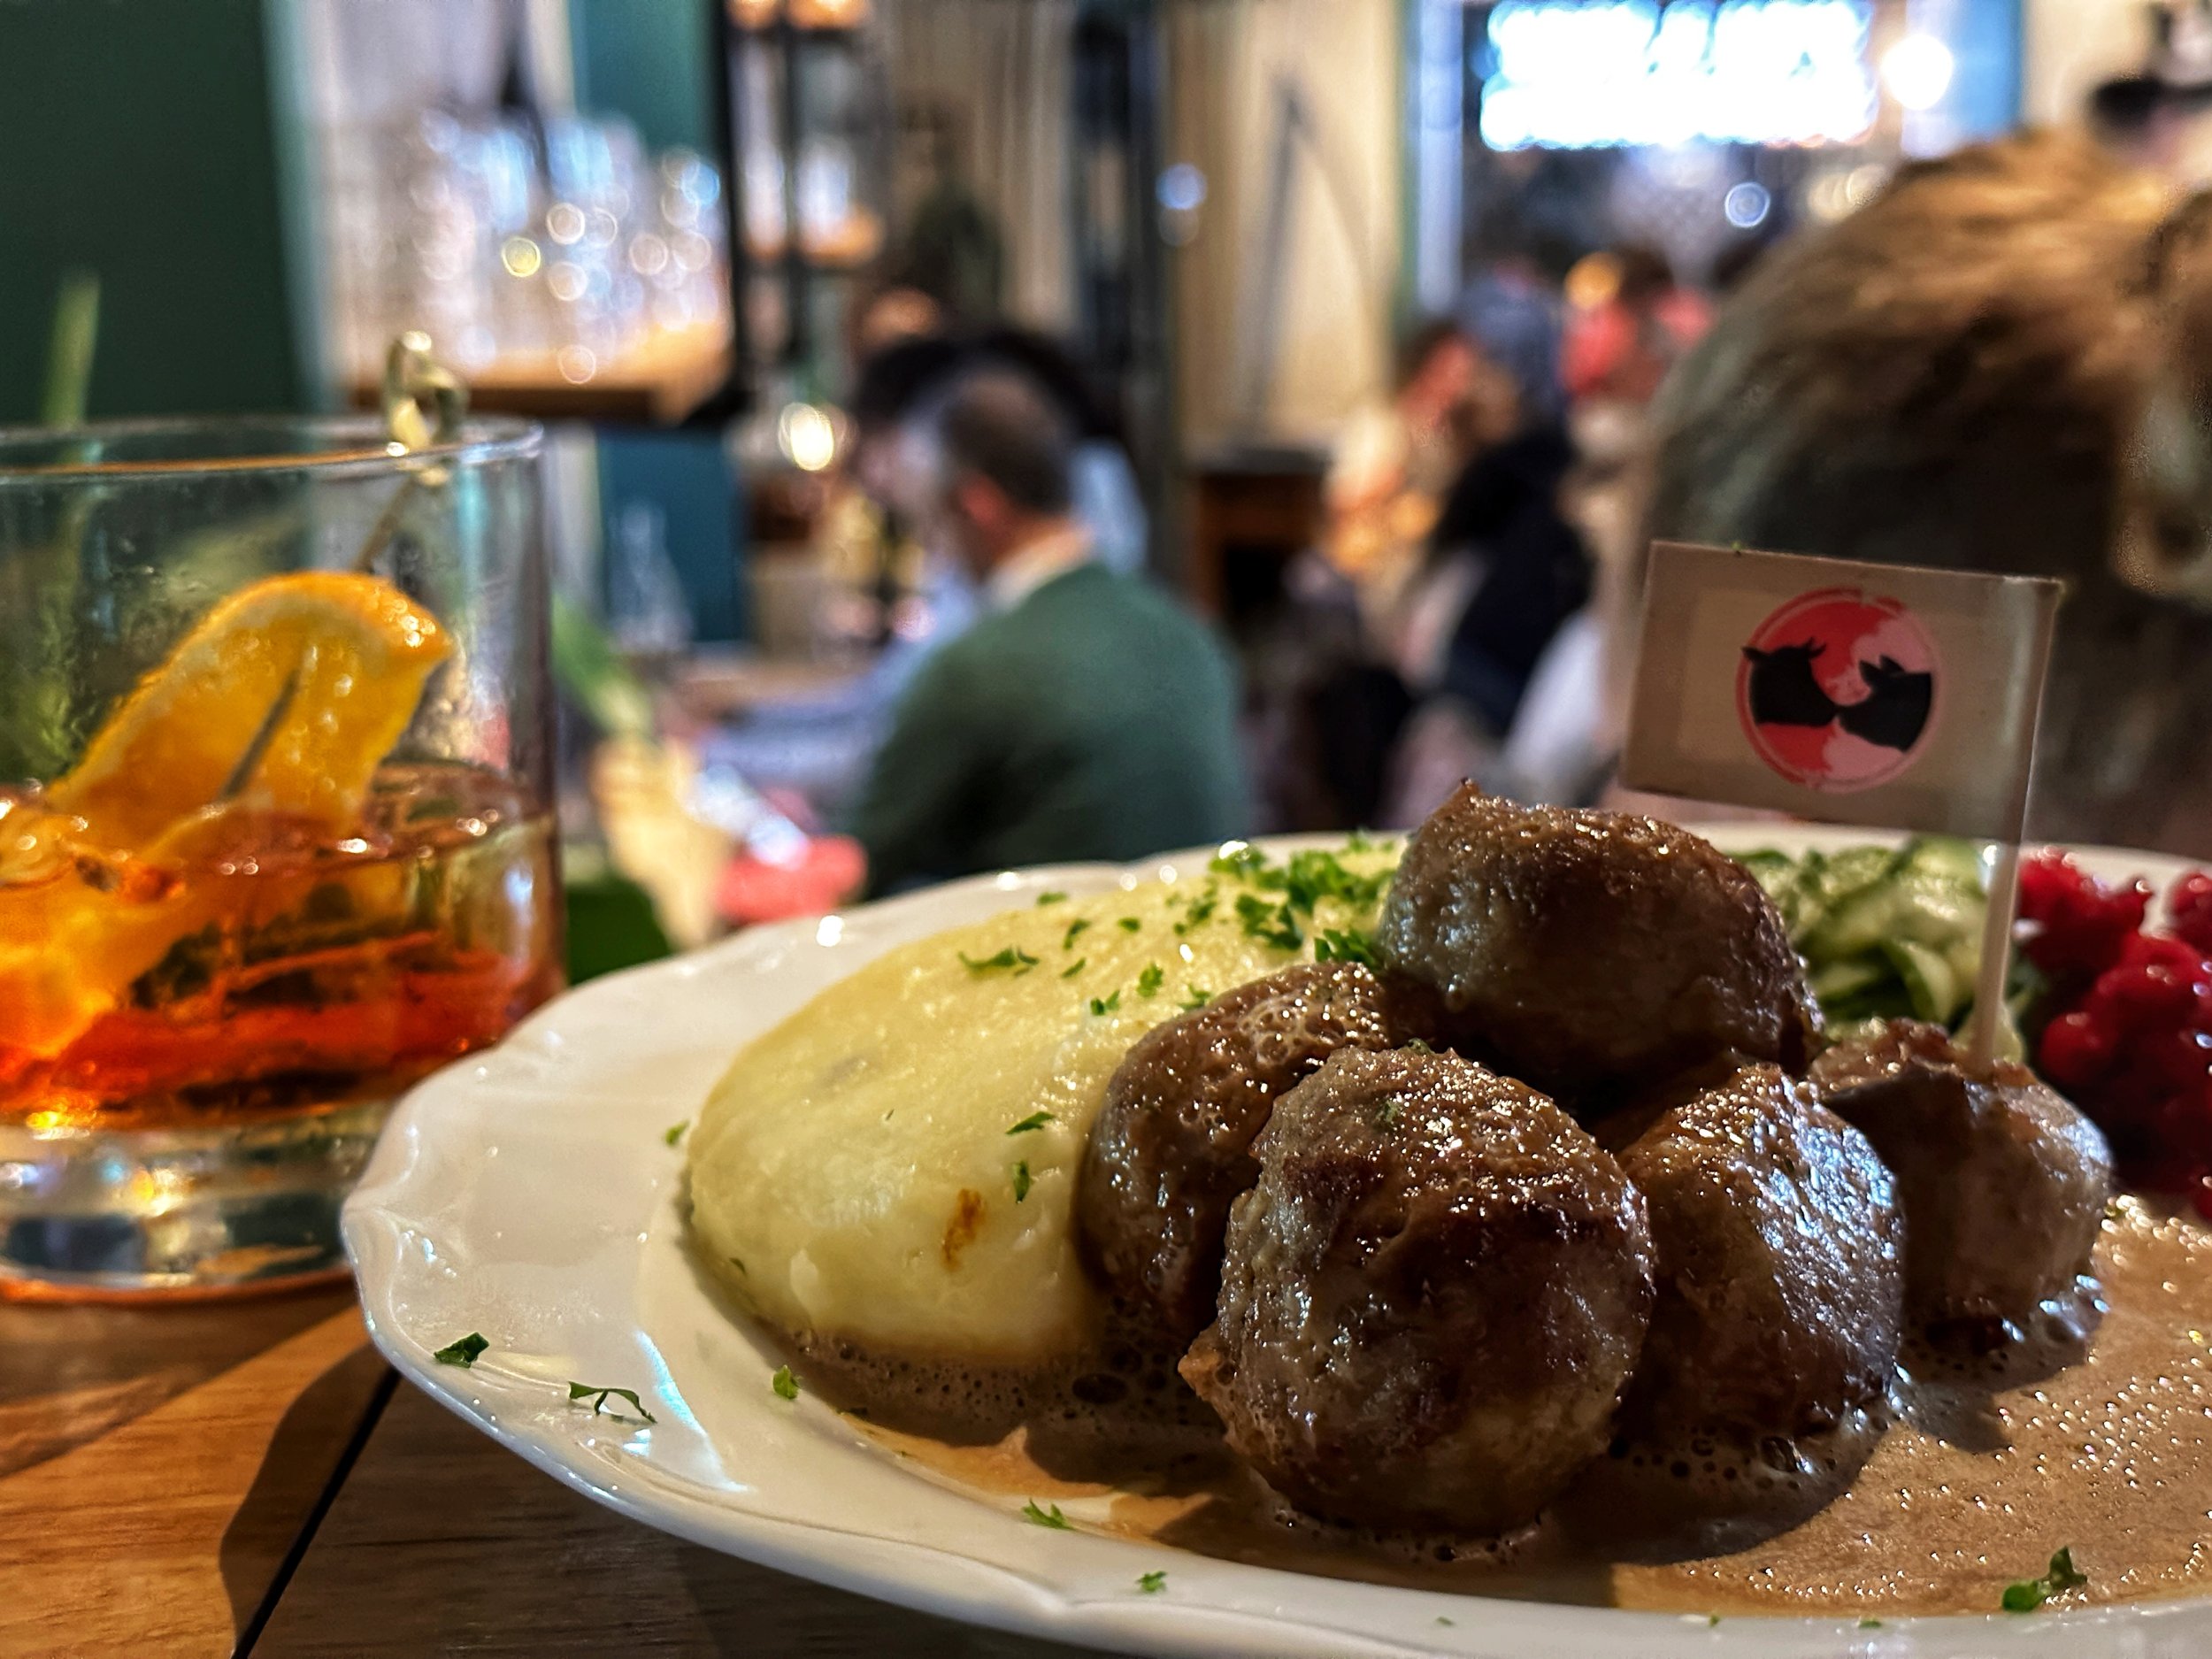 where is the best place to eat swedish meatballs in stockholm